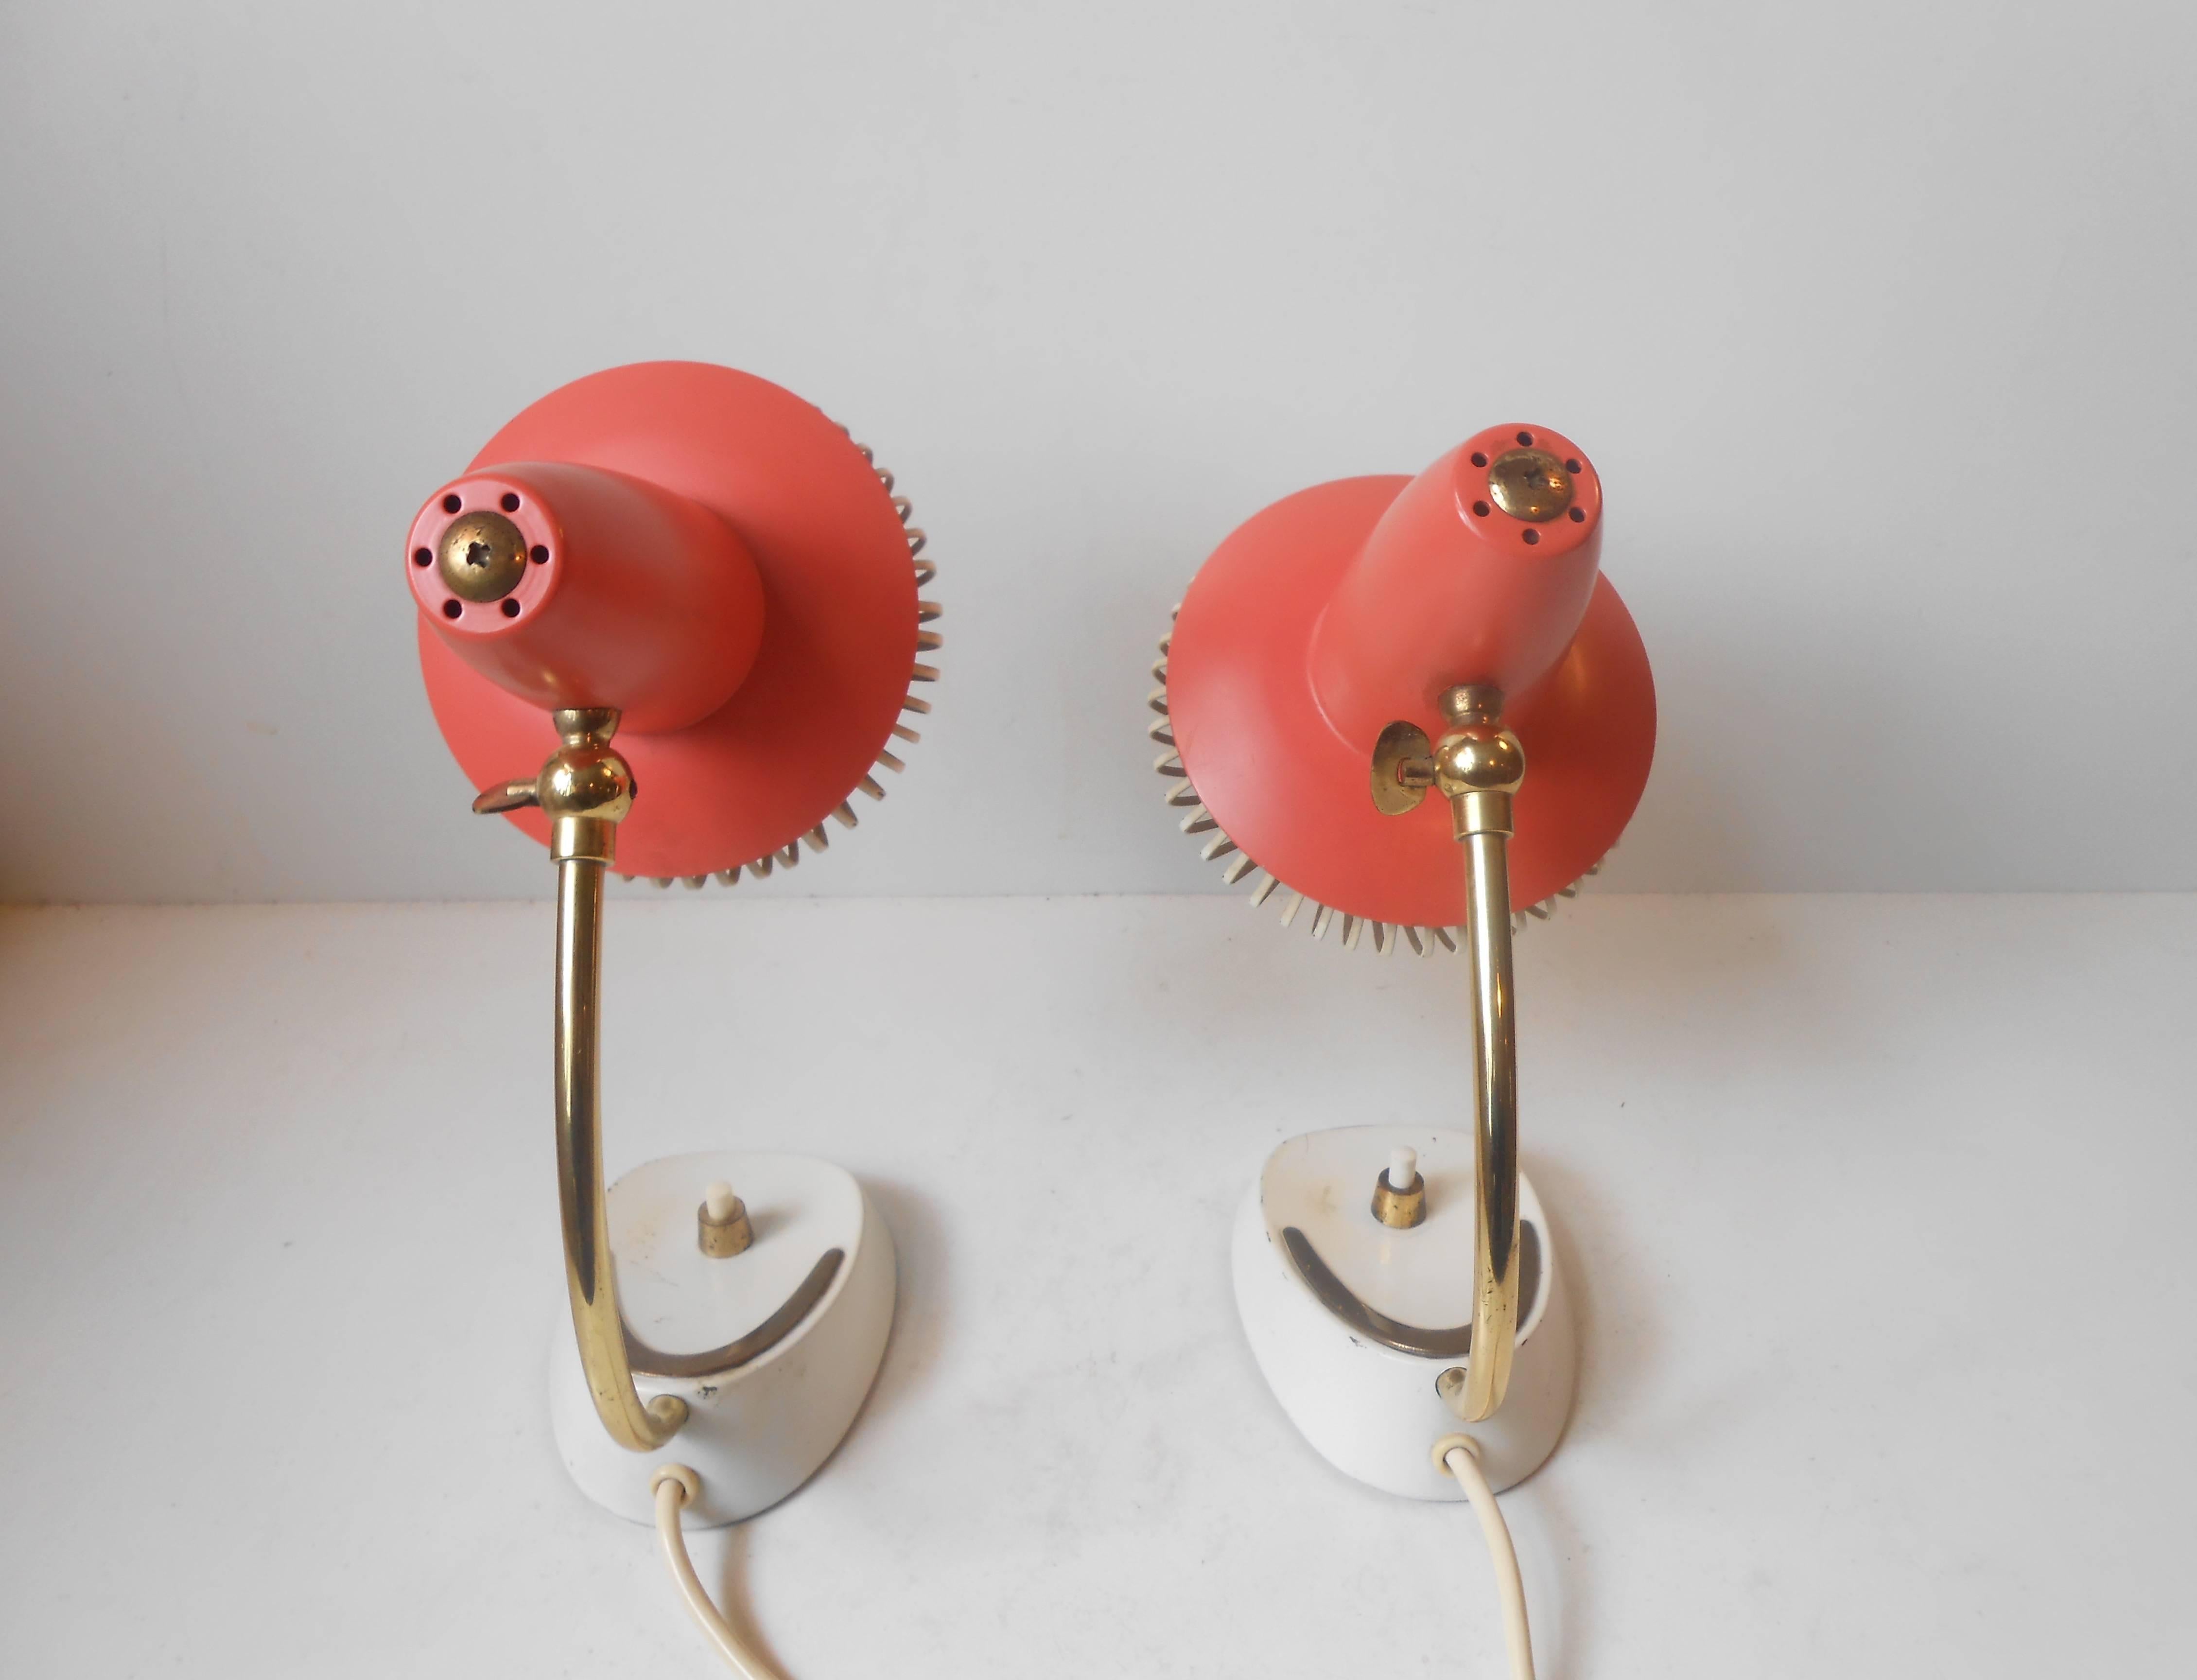 Mid-20th Century Pair of Adjustable Red Table Lamps, Stilnovo Style, Possibly Swiss, ca. 1958-60